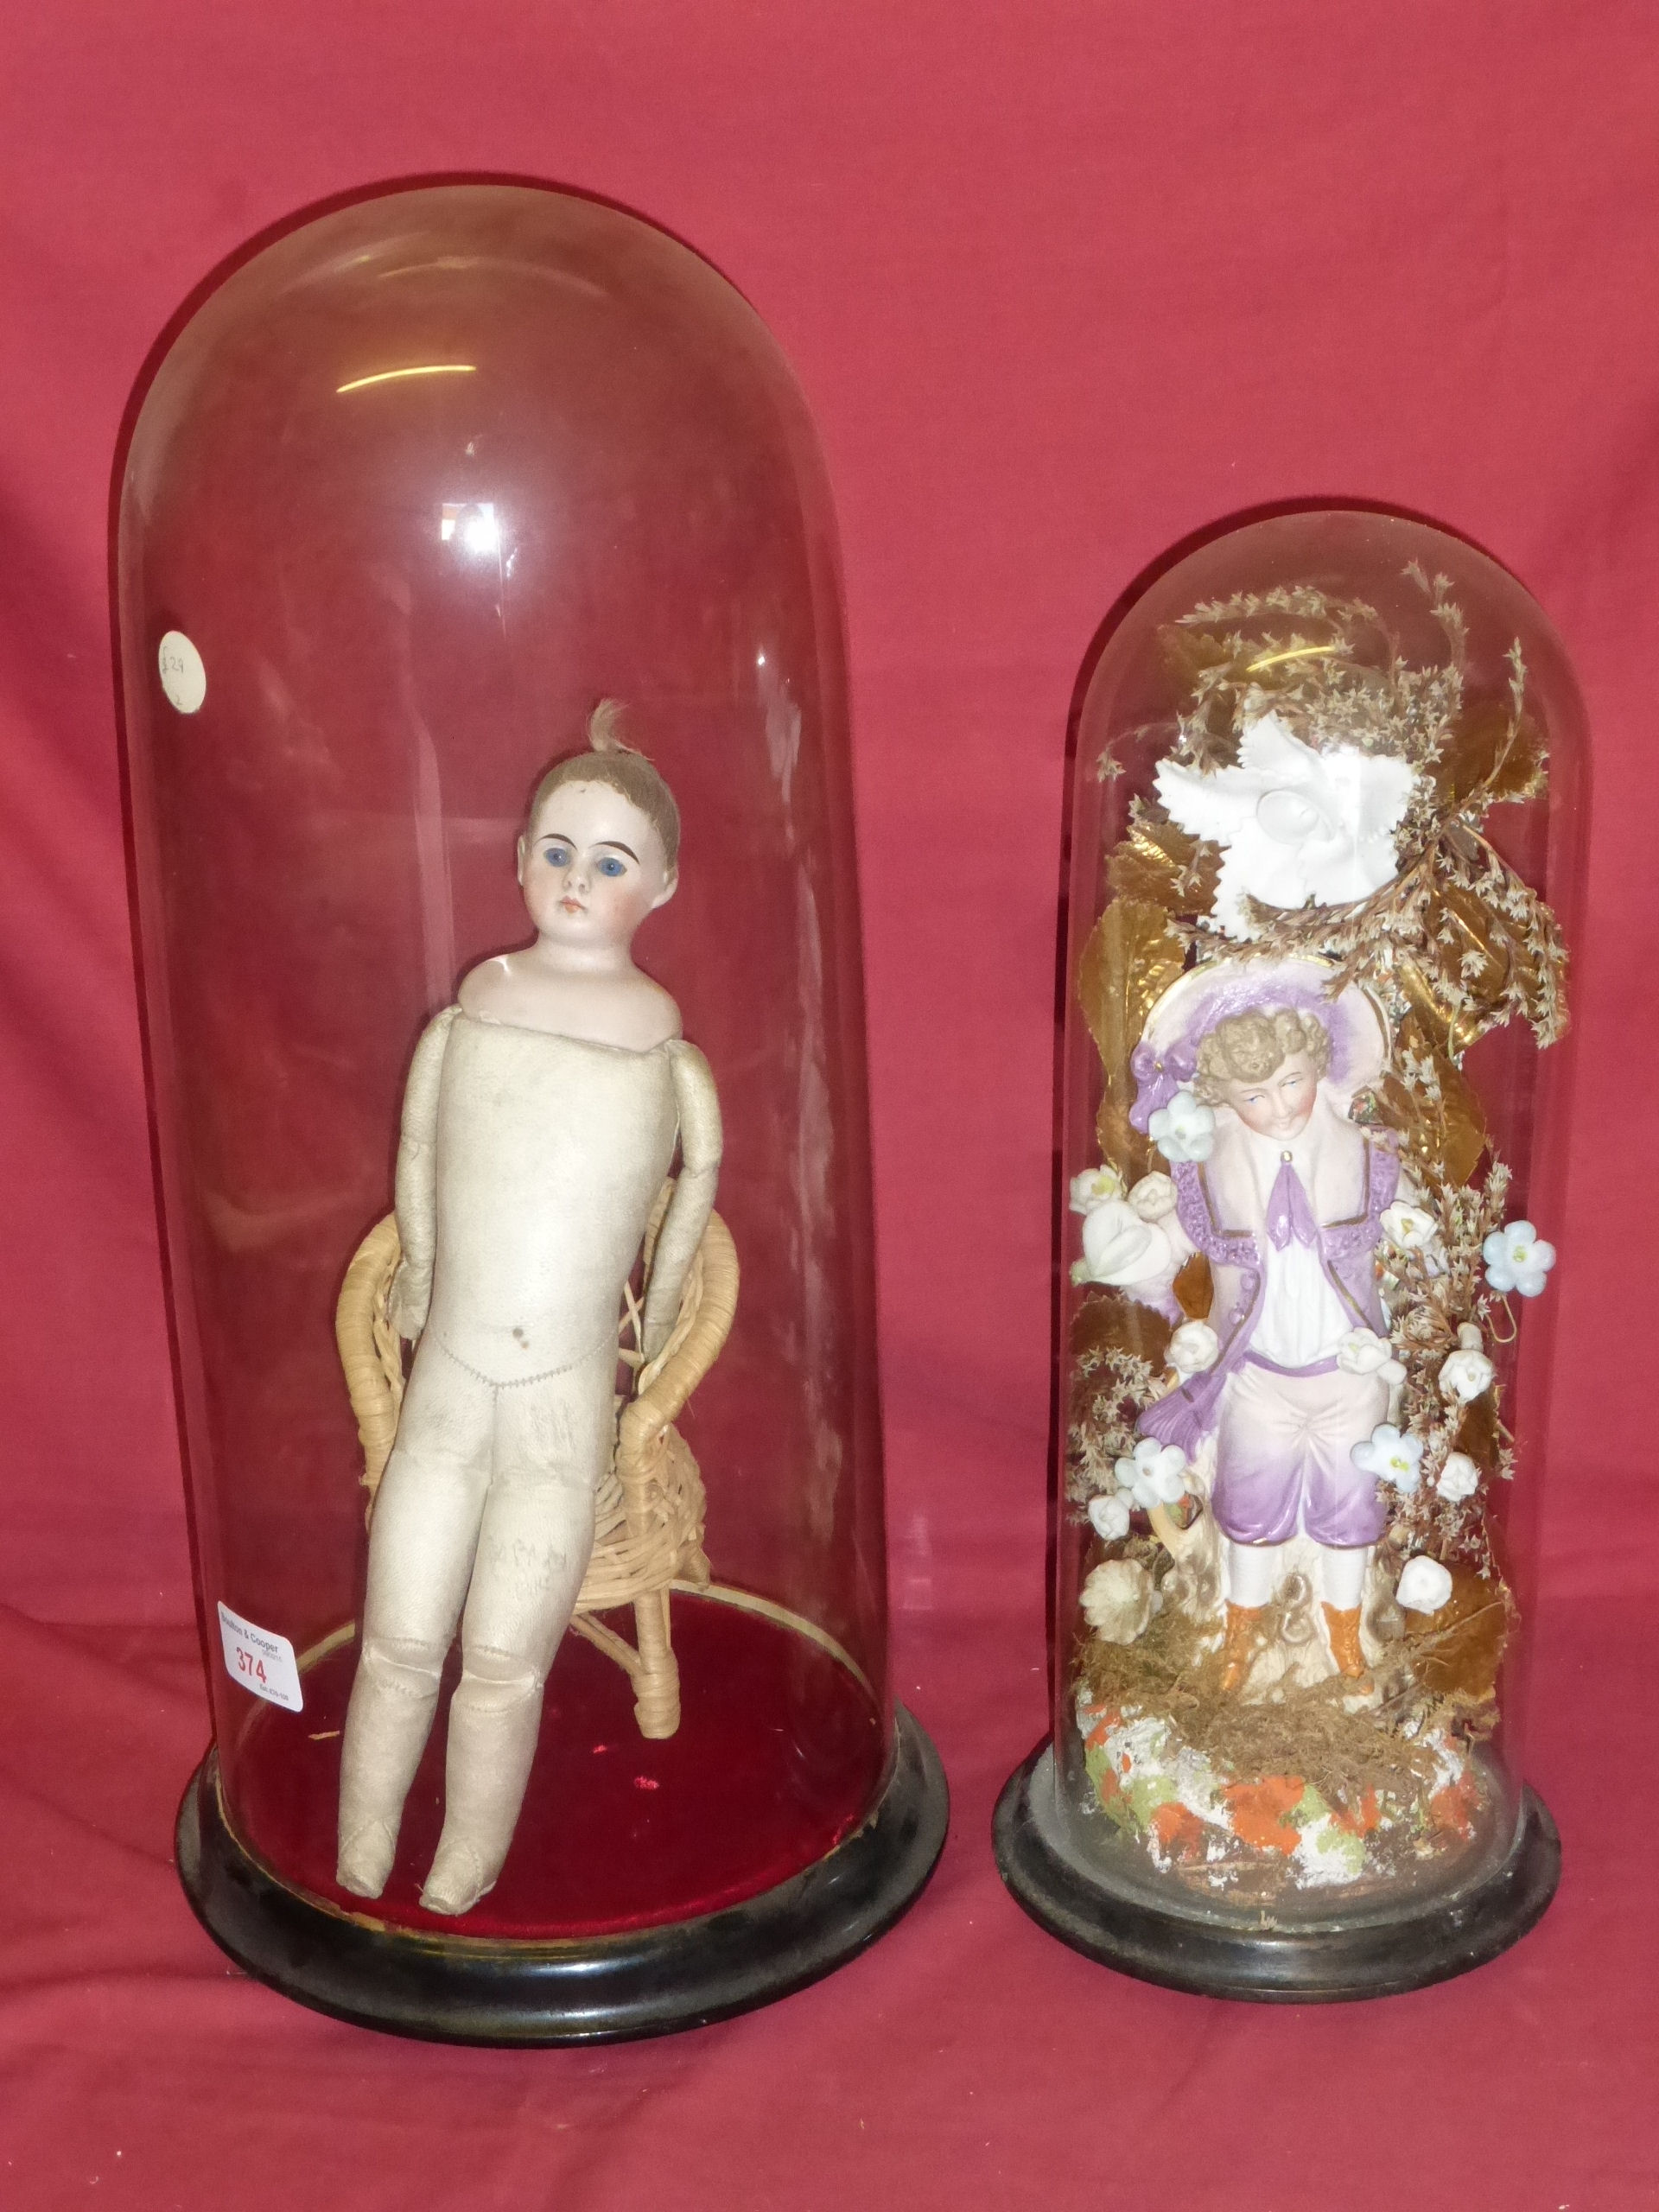 A small bisque head and leather covered Doll sitting in a wicker chair and under a glass dome shade,